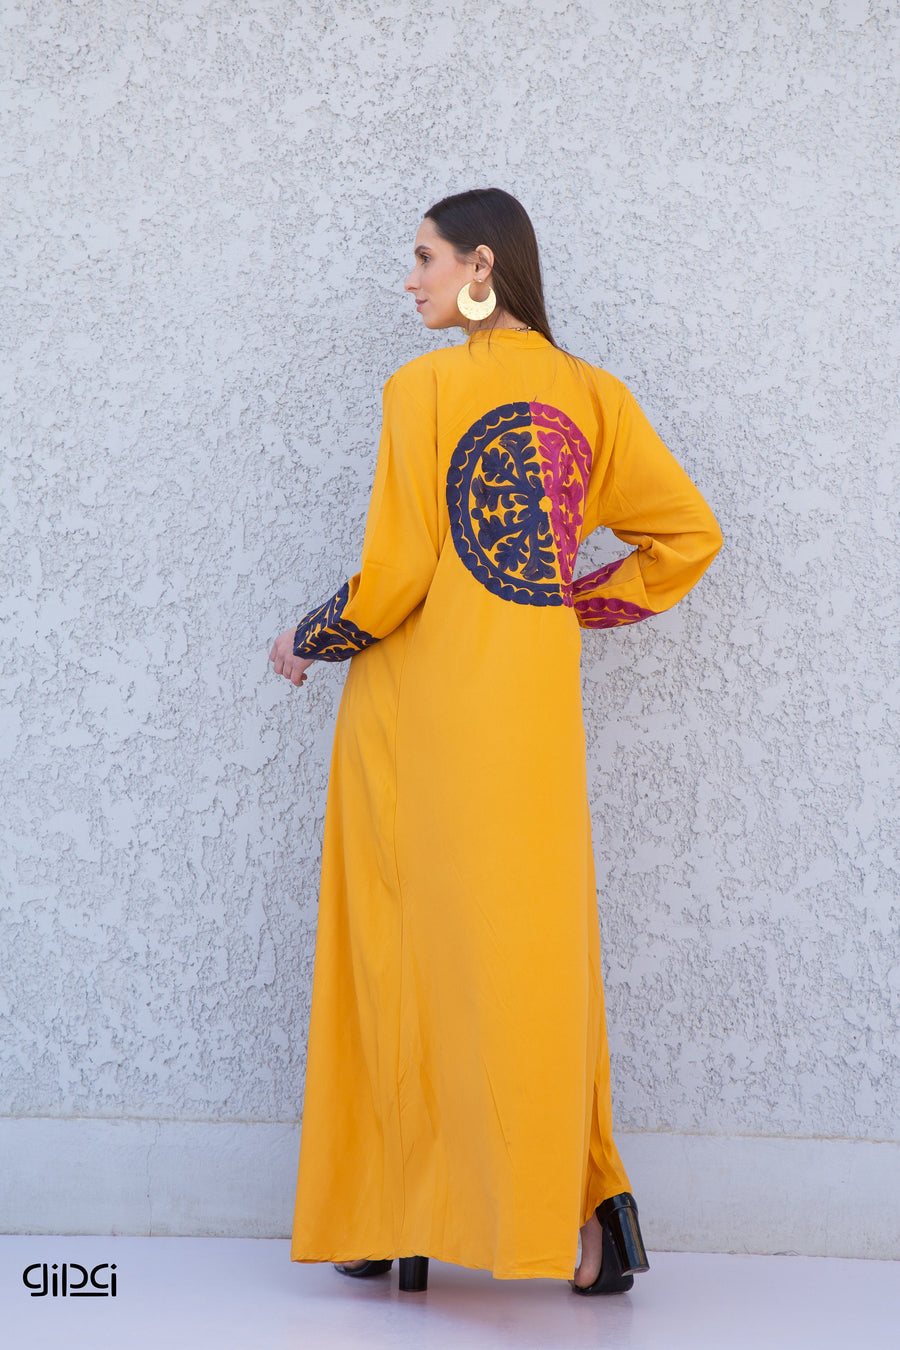 Mustard yellow cotton caftan dress, Front and back embroidered Cotton caftan, Chic embroidered caftan, High quality Egyptian cotton